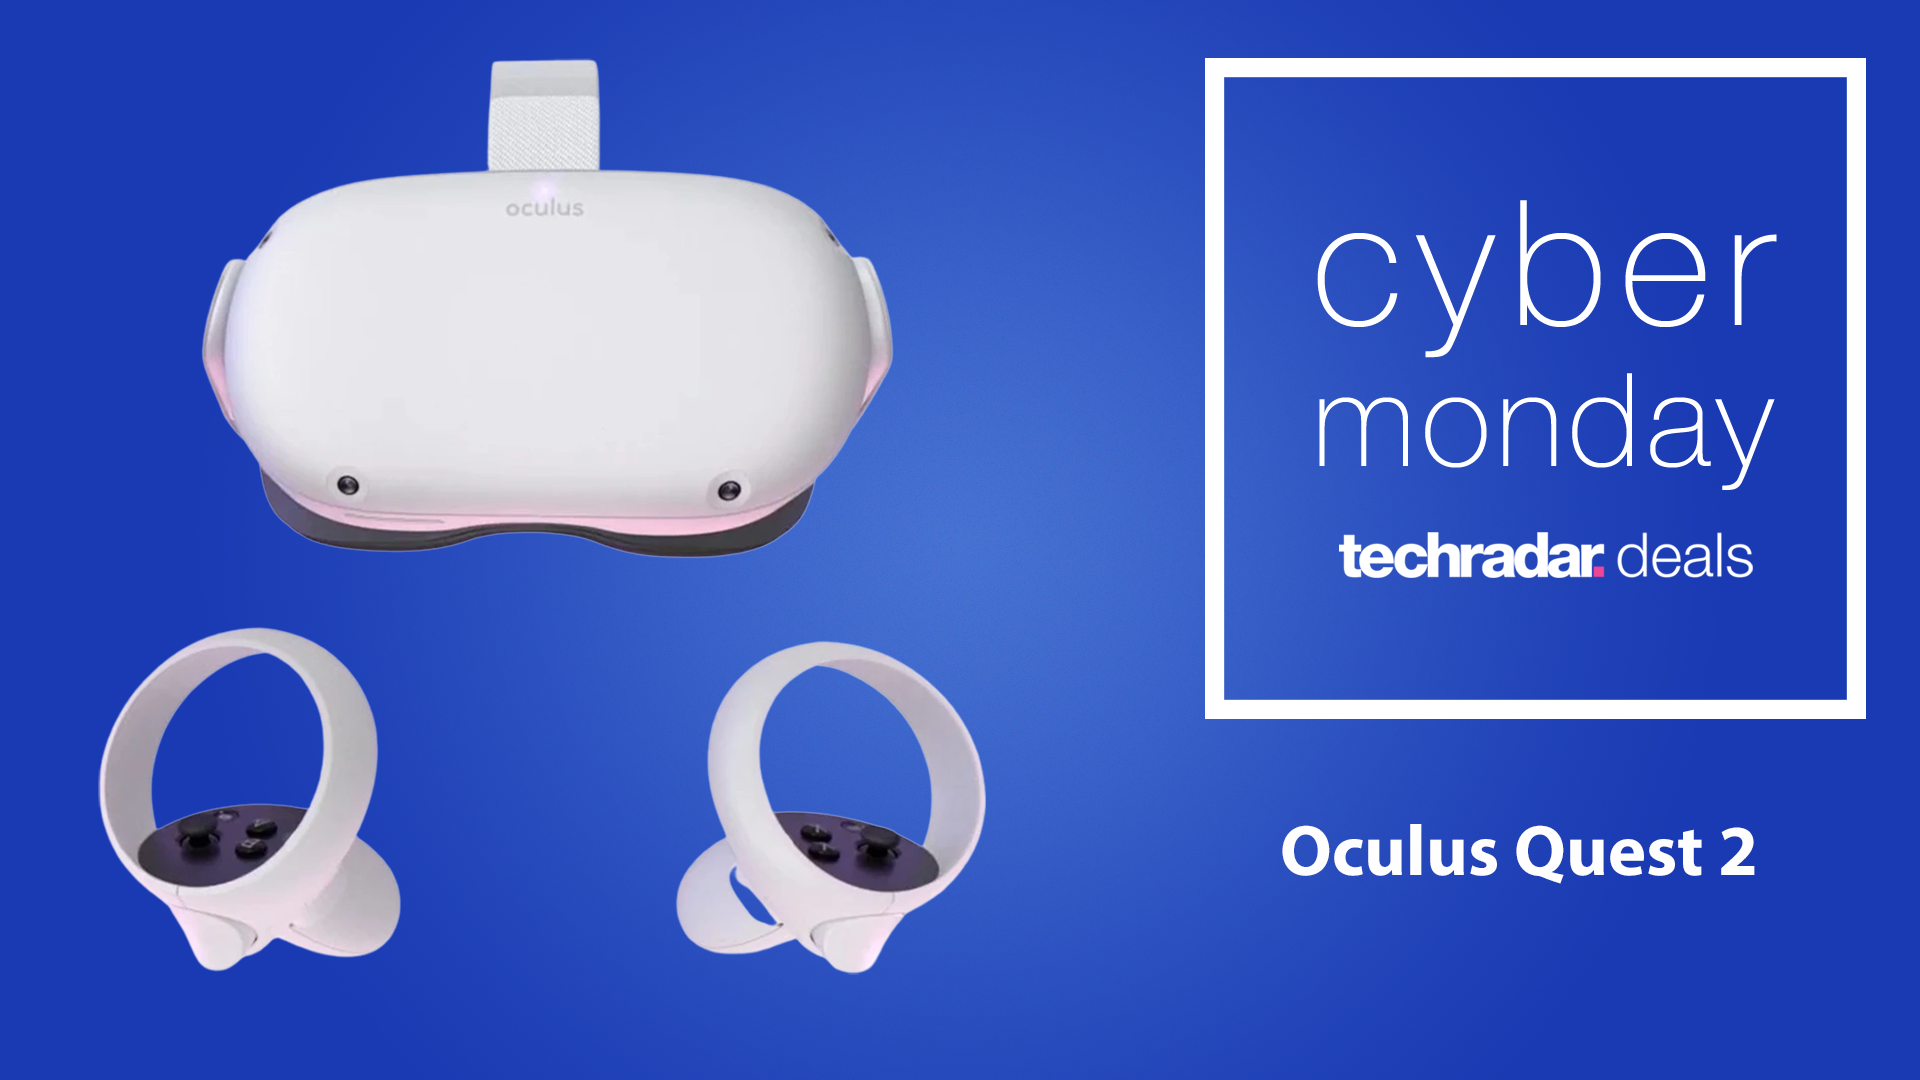 Oculus Quest 2 in front of a blue banner for Cyber Monday